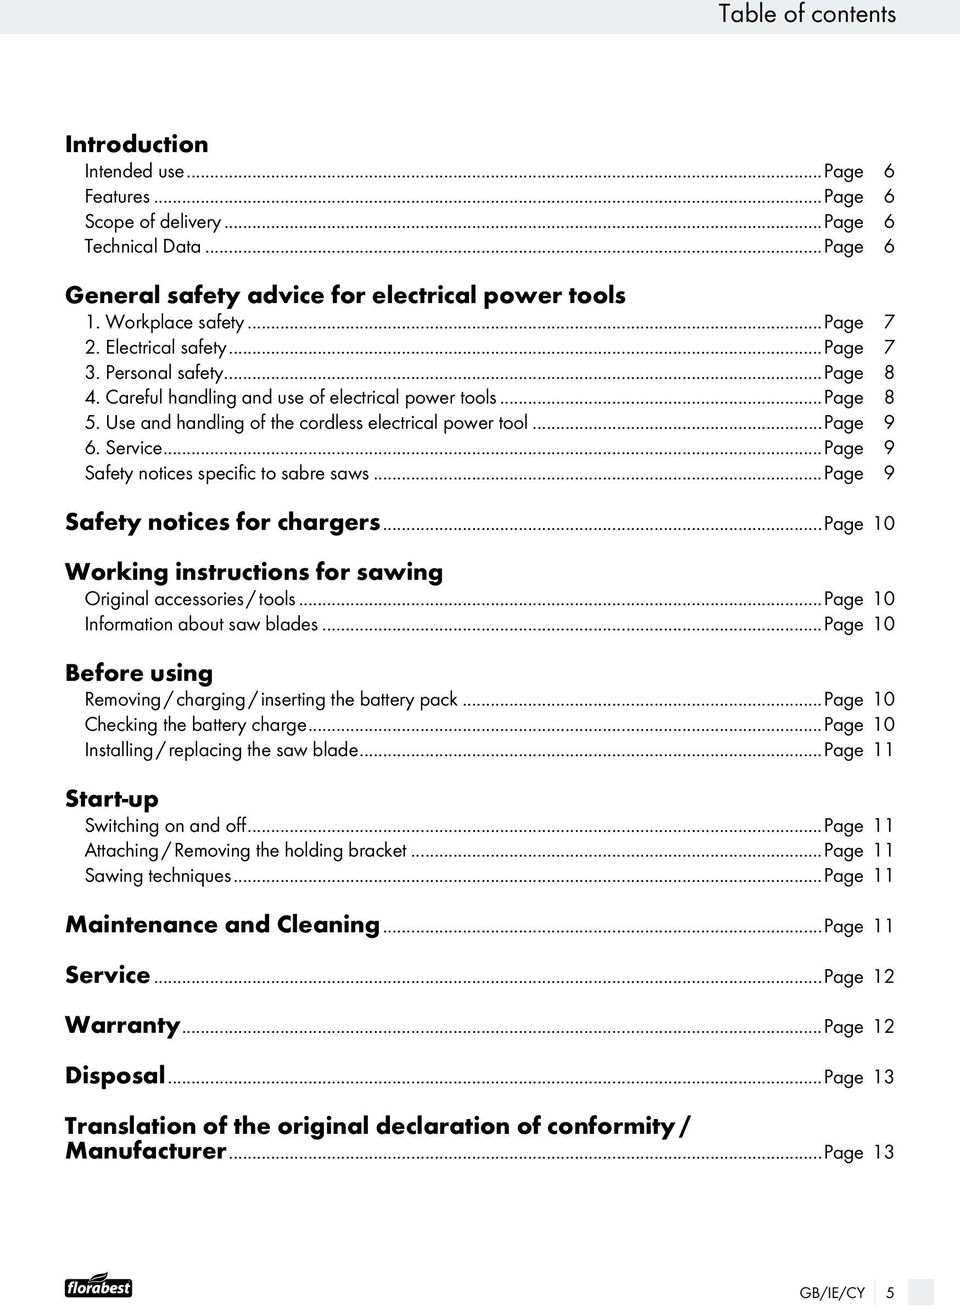 ..Page 9 Safety notices specific to sabre saws...page 9 Safety notices for chargers...page 10 Working instructions for sawing Original accessories / tools...page 10 Information about saw blades.